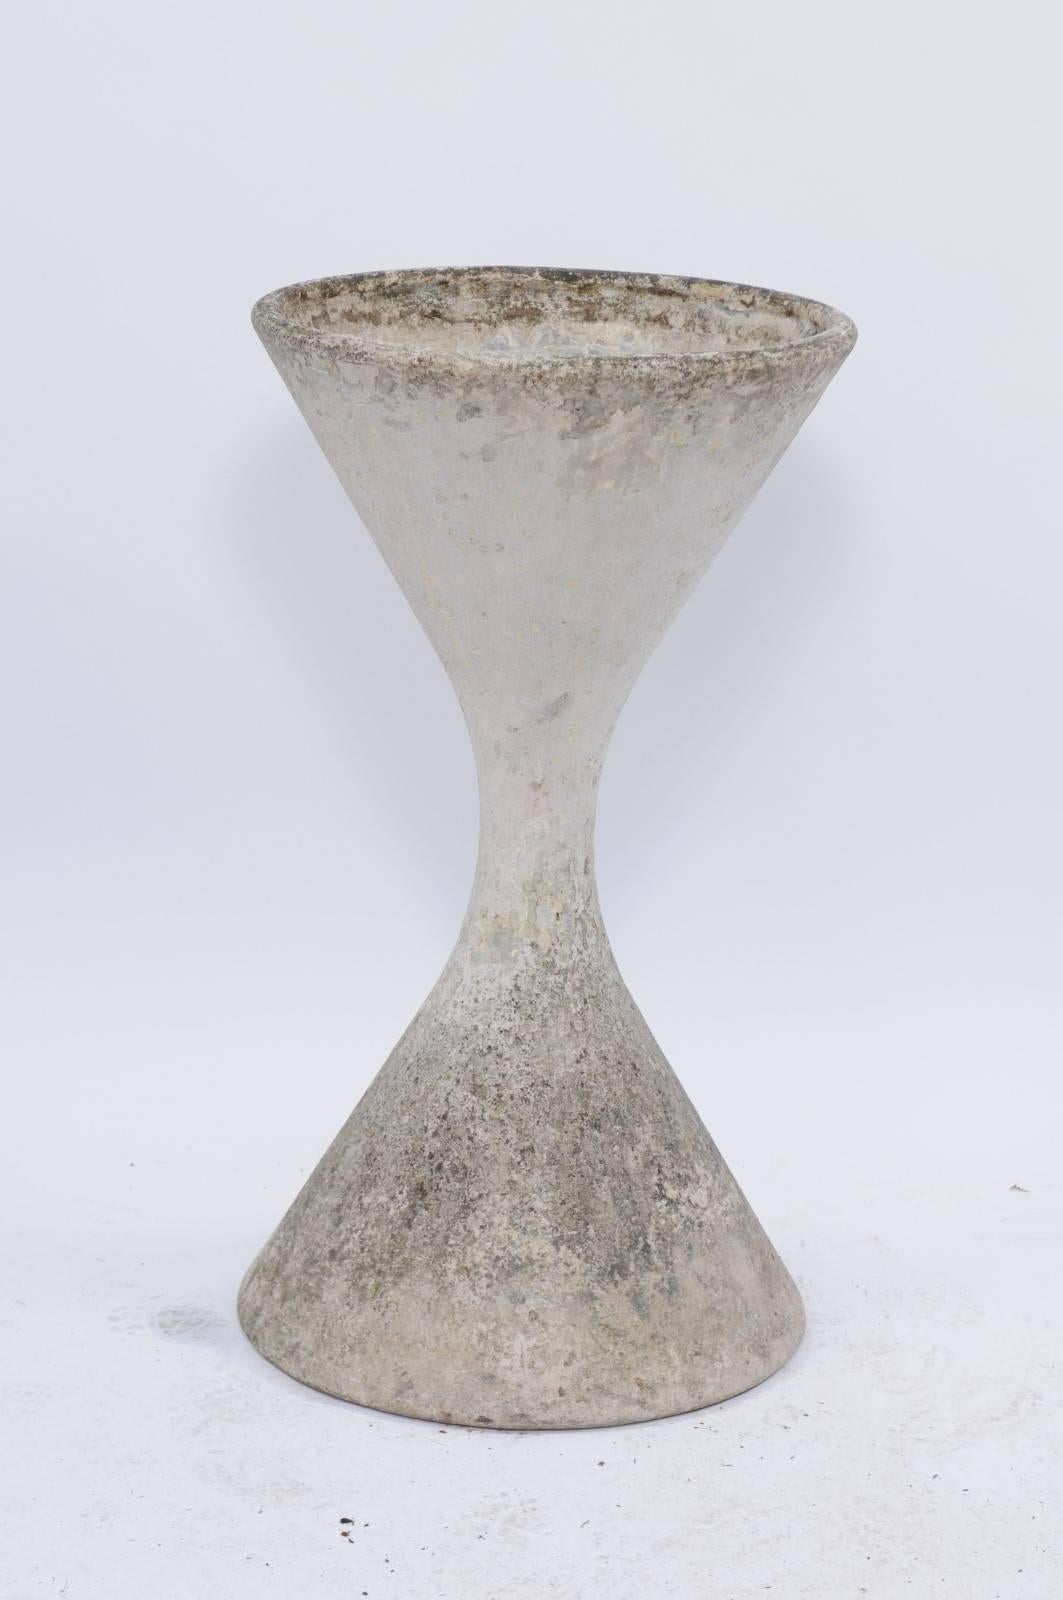 Vintage Willy Guhl for Eternit concrete diabolo planter in hourglass shape from Switzerland, 1960s. We look long and hard for the original Willy Guhl planters that once graced the shores of the Lac Leman in Lausanne, Switzerland. The sign of the